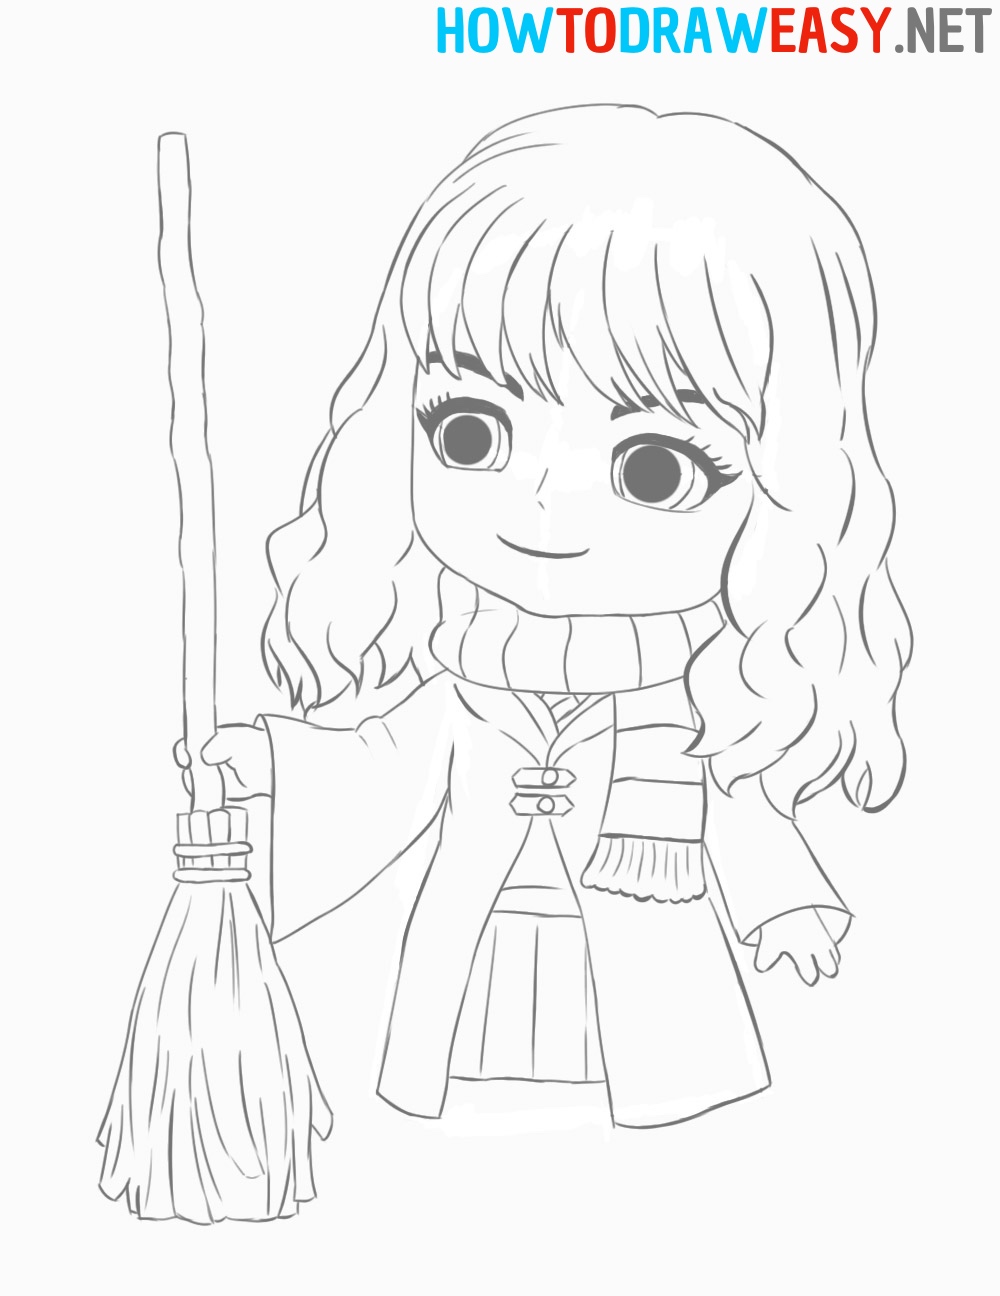 Hermione Granger How to Draw